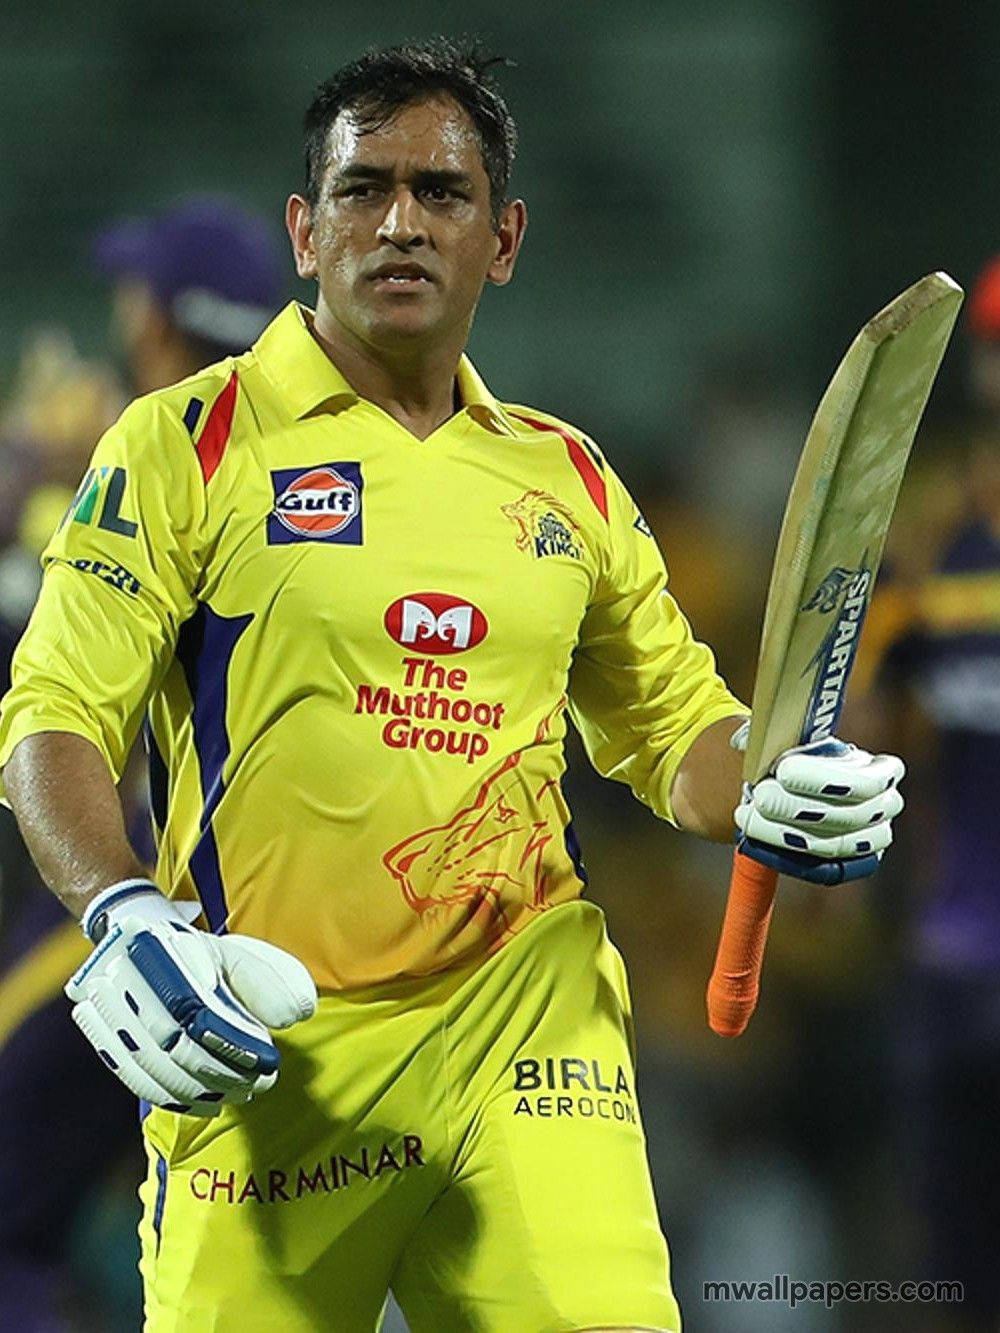 Majestic View Of Cricket Legend Ms Dhoni In Hd Wallpaper